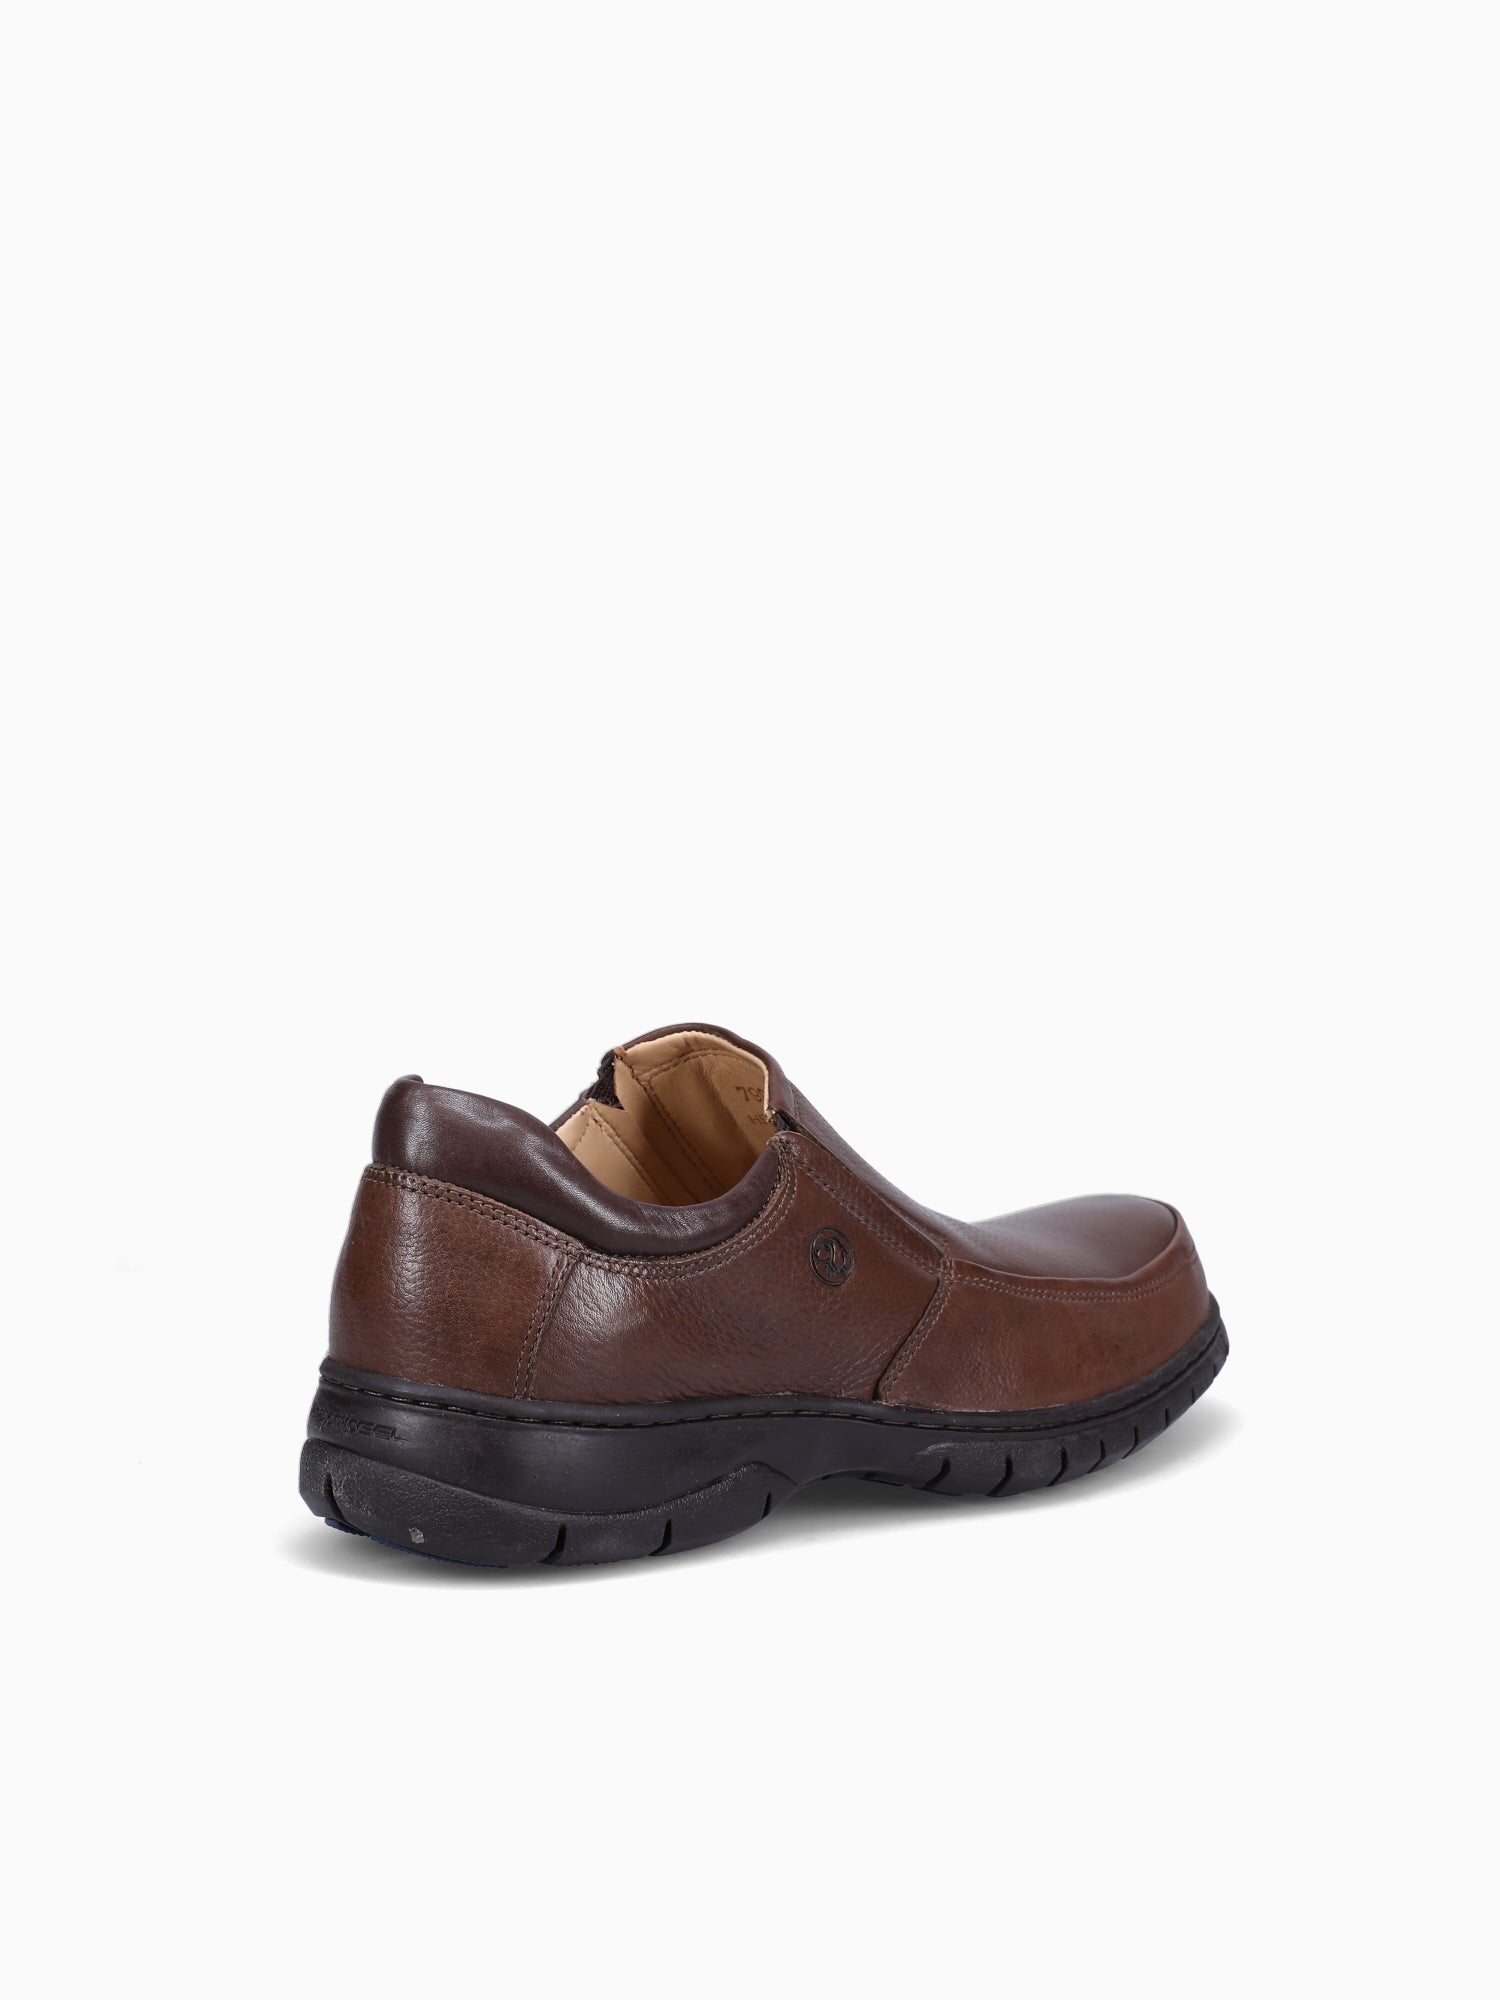 7902 Troy Floater Brown / 7 / M